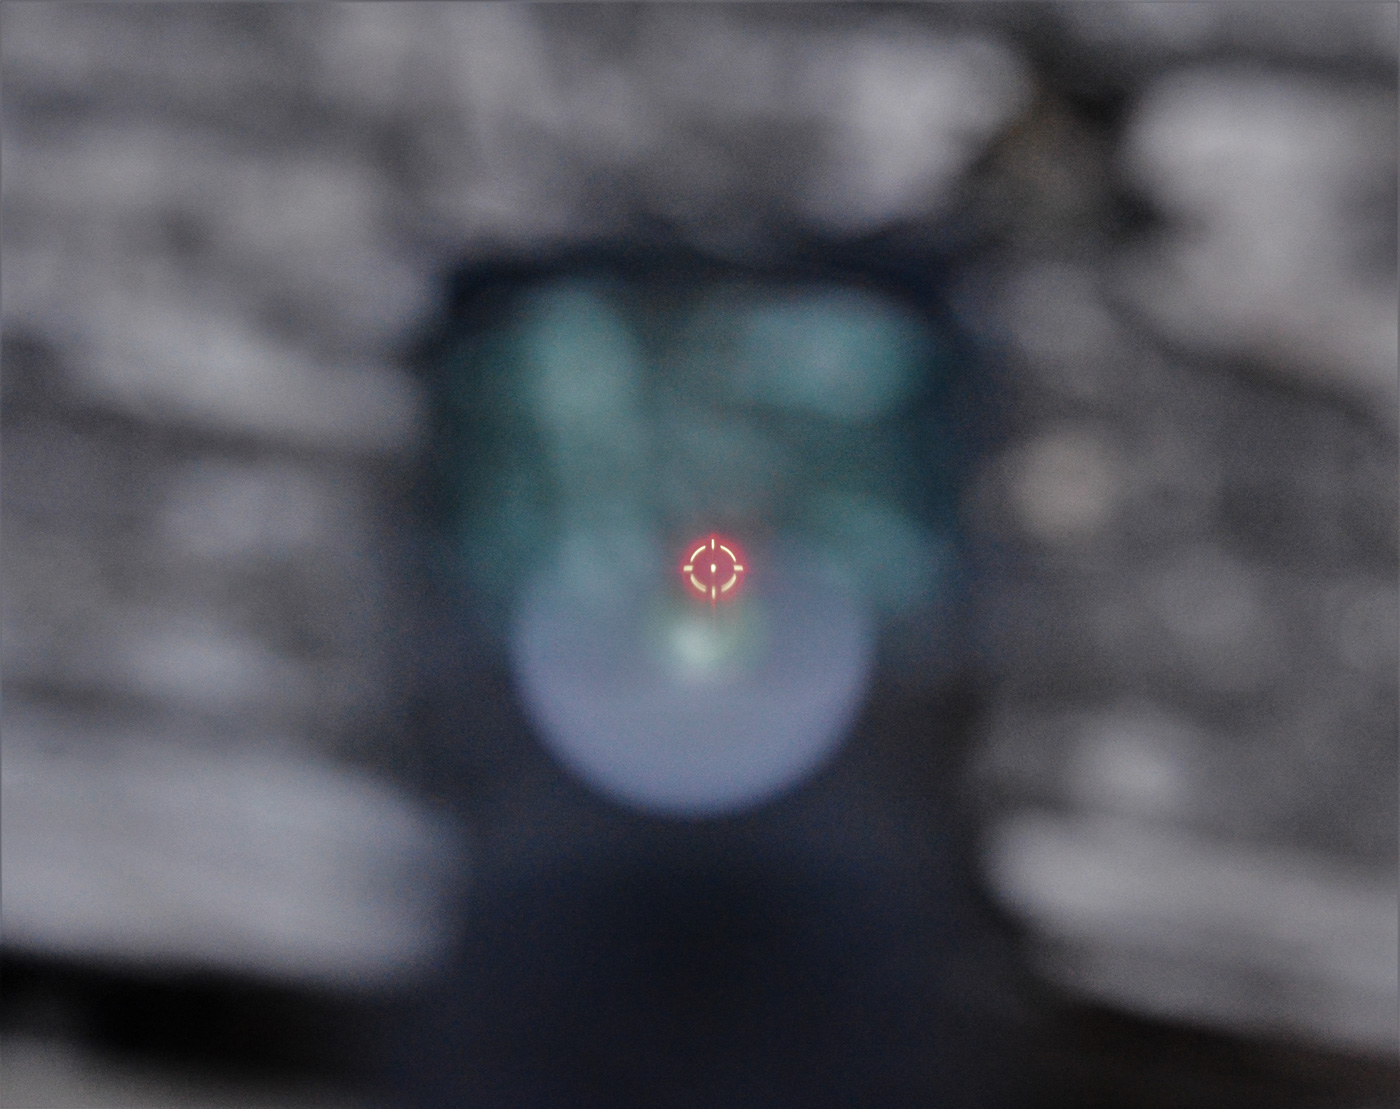 holosun eps carry reticle